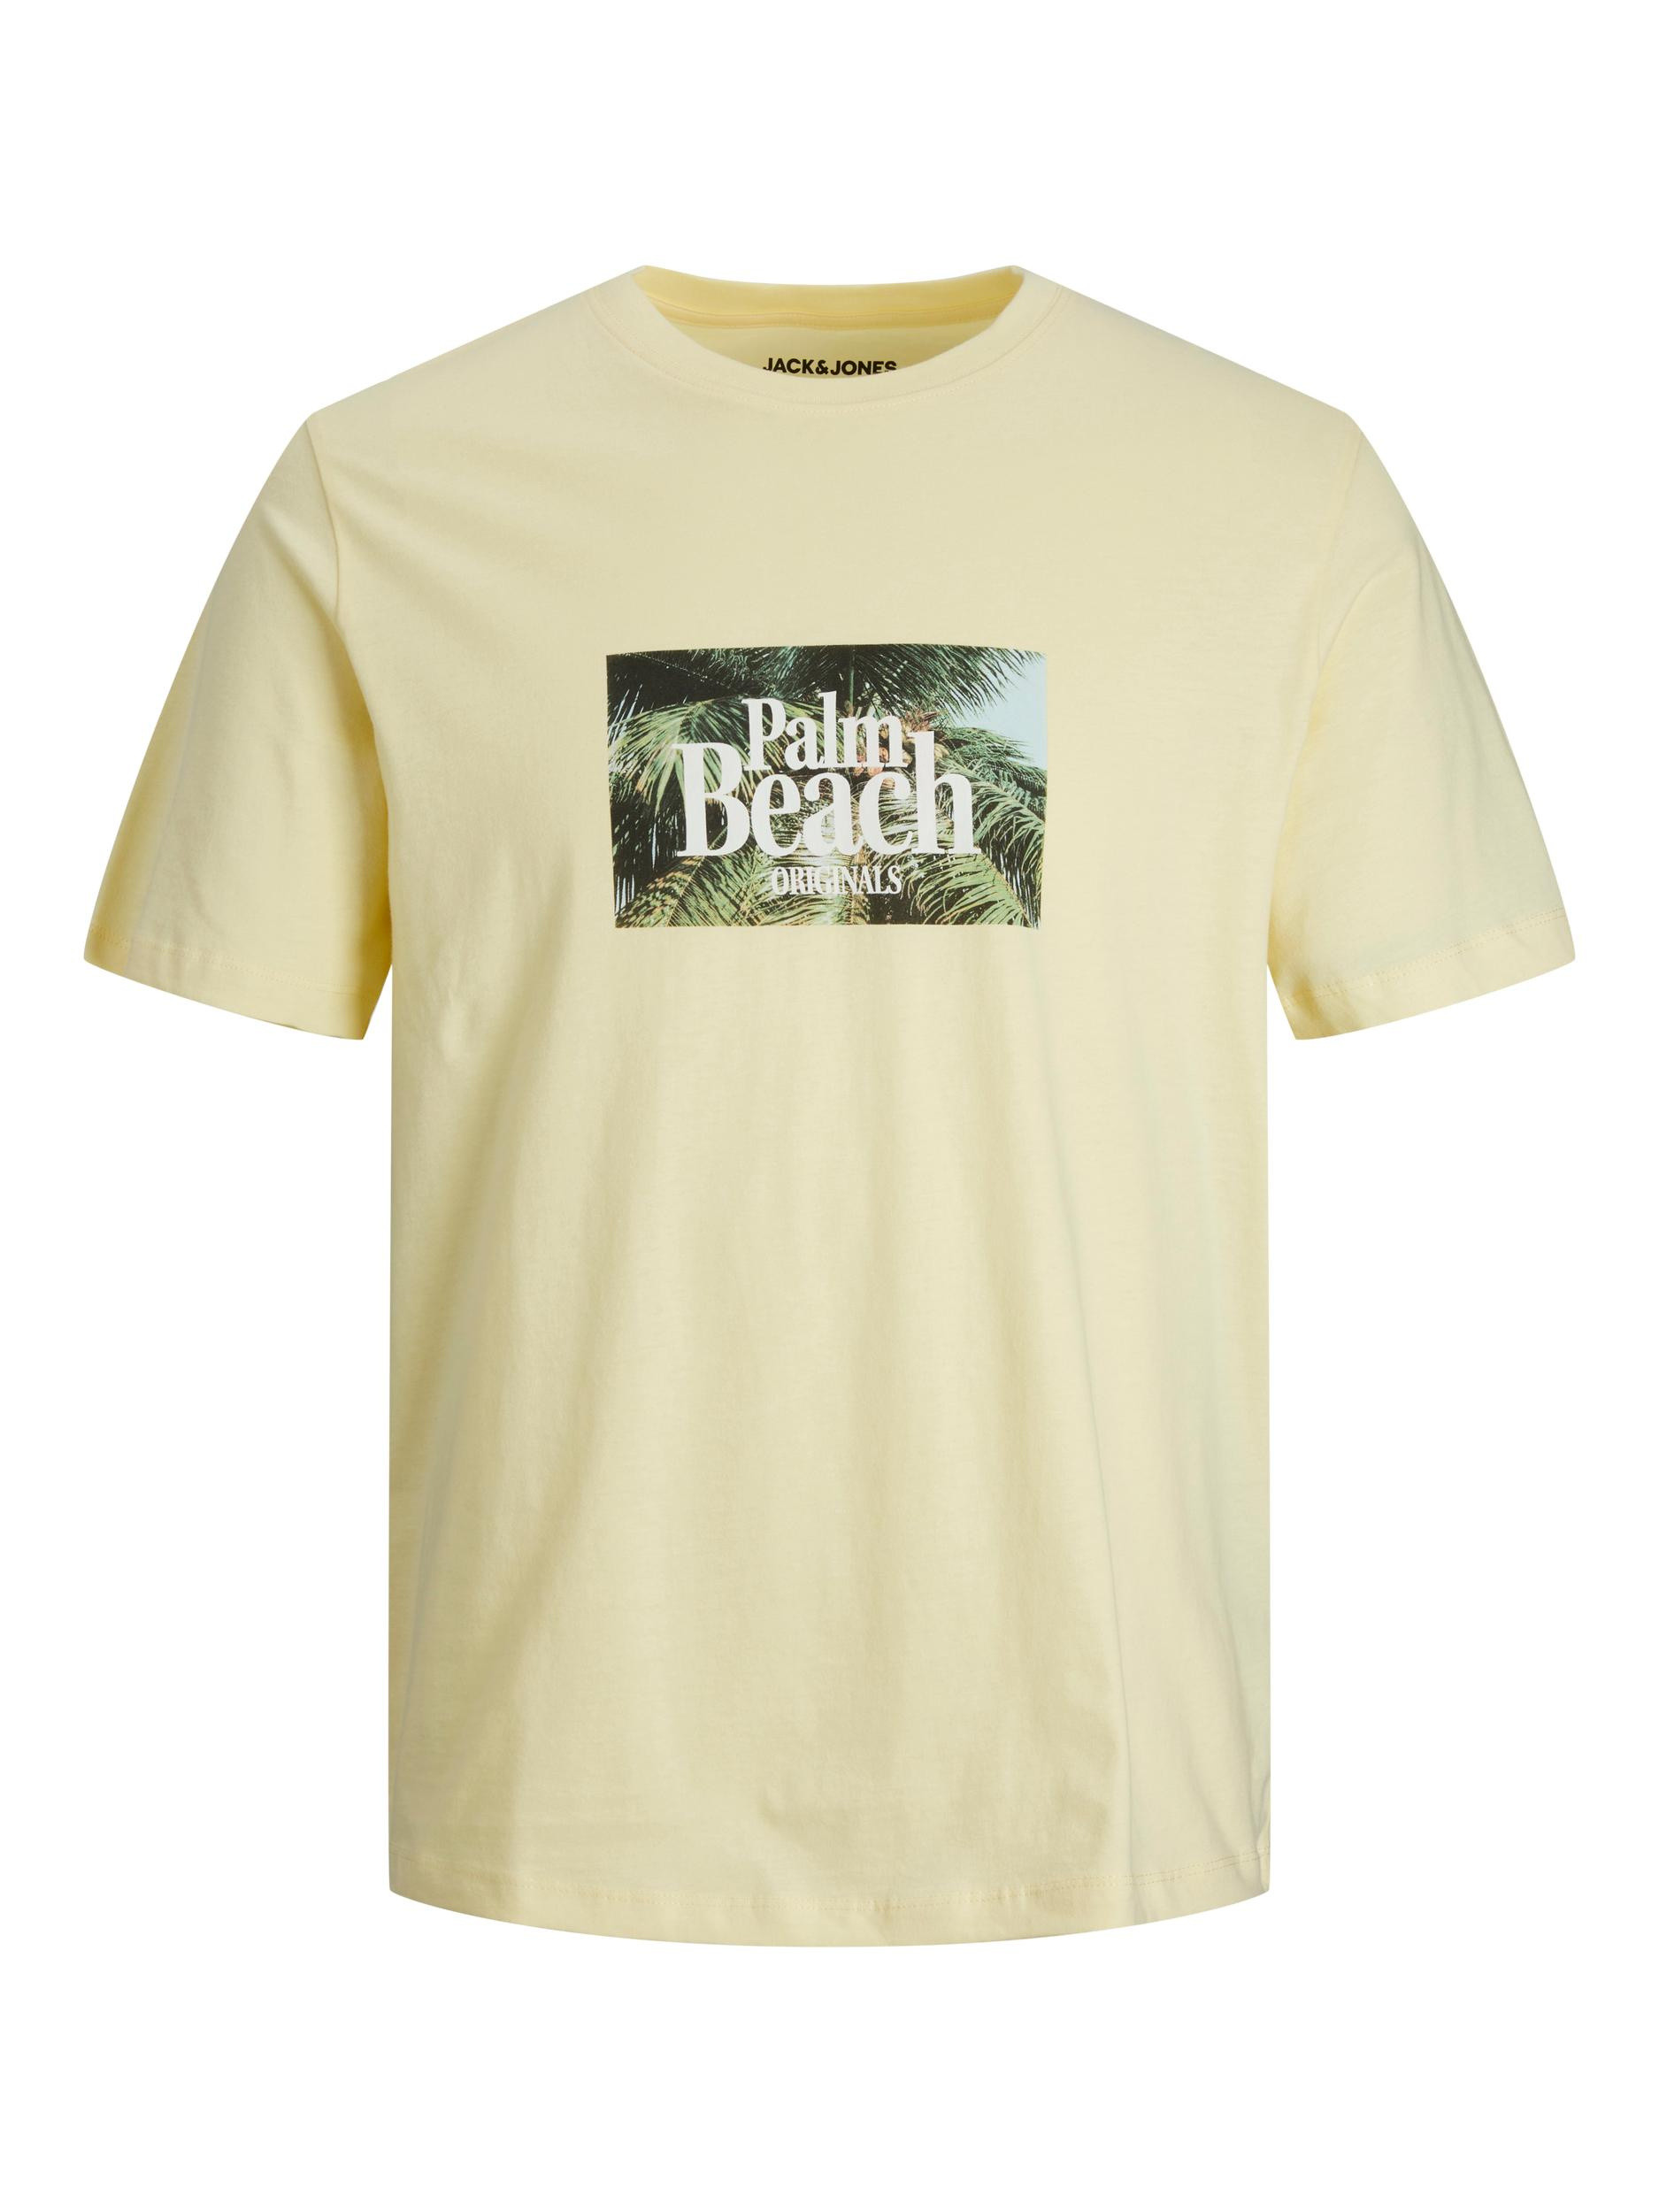 Jack & Jones - T-shirt con stampa in cotone, Giallo chiaro, large image number 0